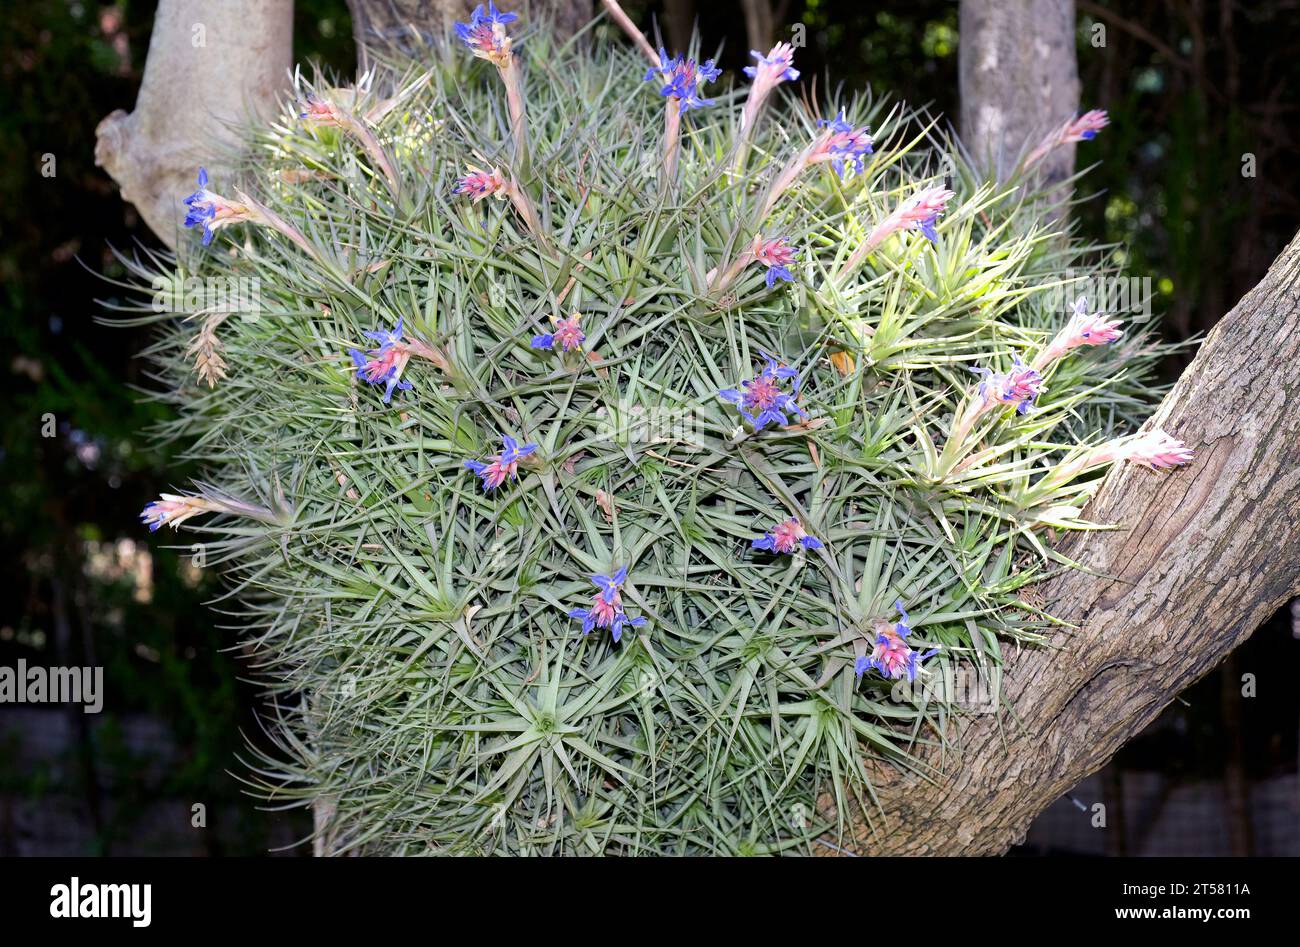 Clavel de aire (Tillandsia aeranthos) is an epiphytic plant native to South America (Brazil, Argentina, Paraguay and Uruguay). Stock Photo